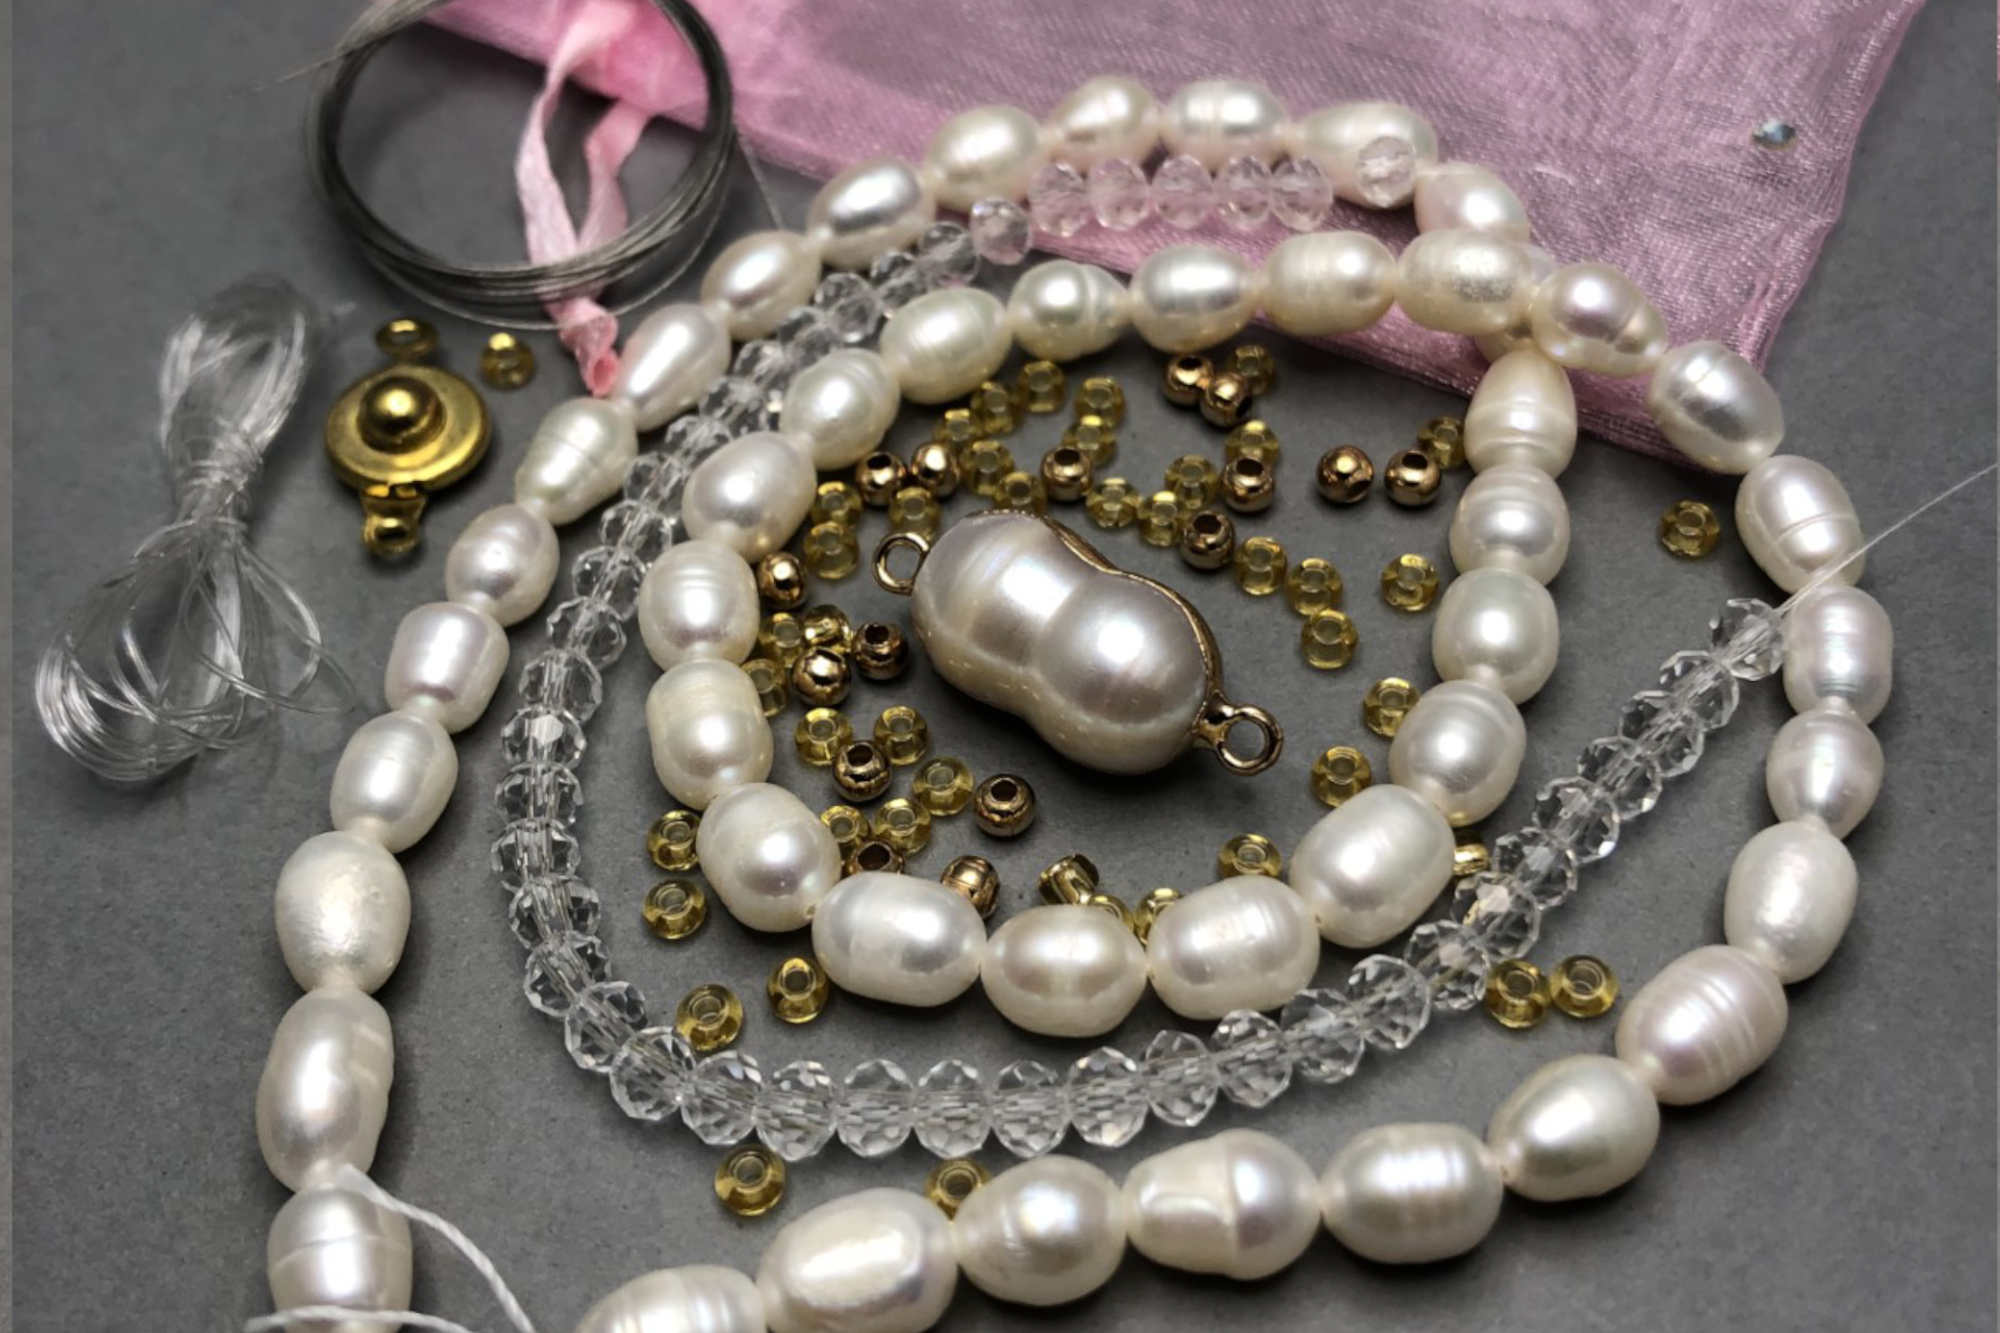 Freshwater Pearl Necklace Kit, Fused Bead, 2 Loops With Gold Edge Pendant